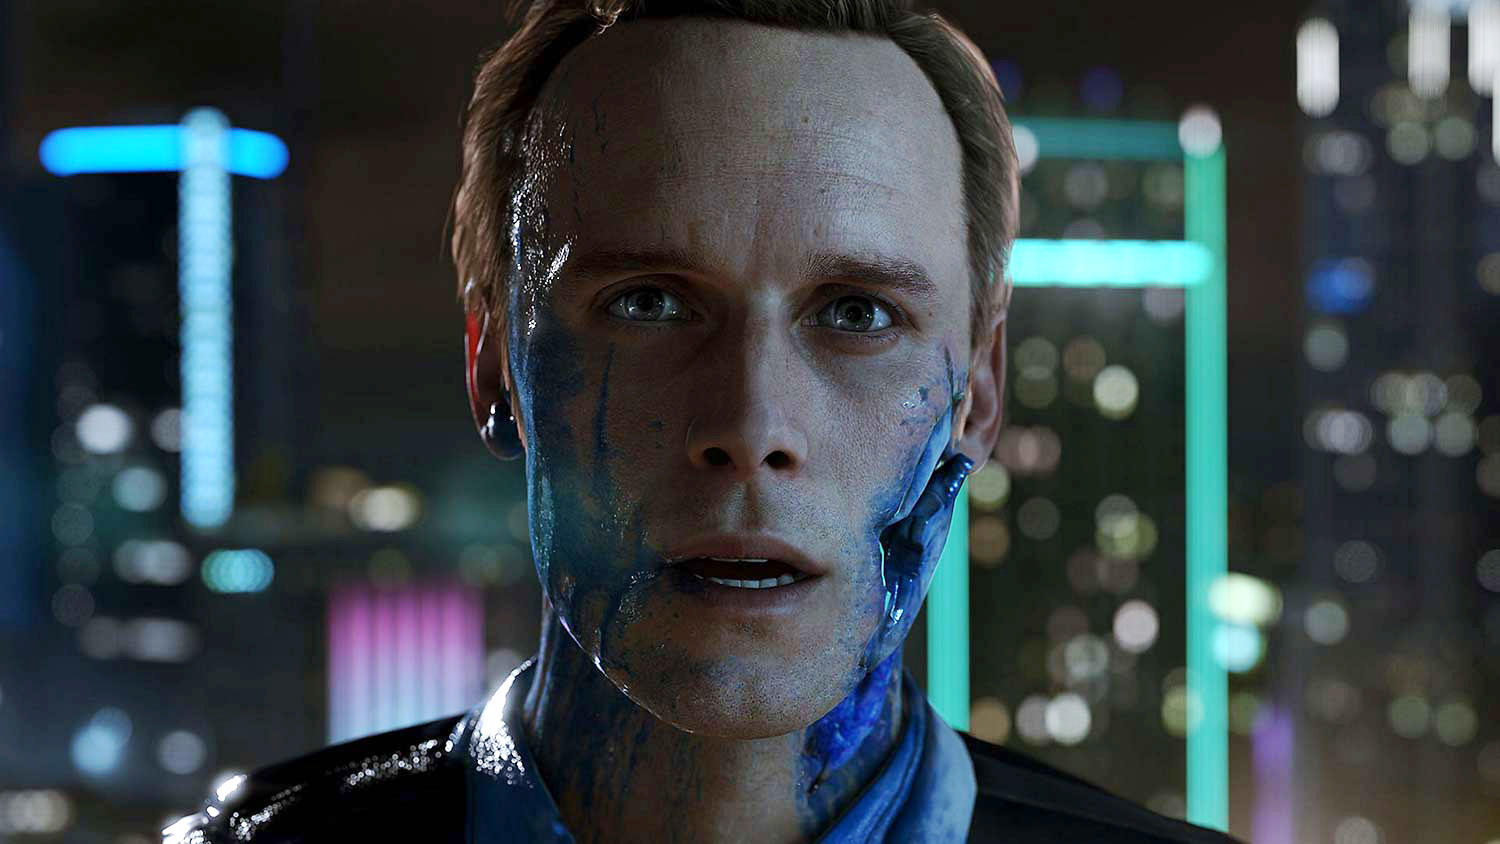 detroit become human iso download